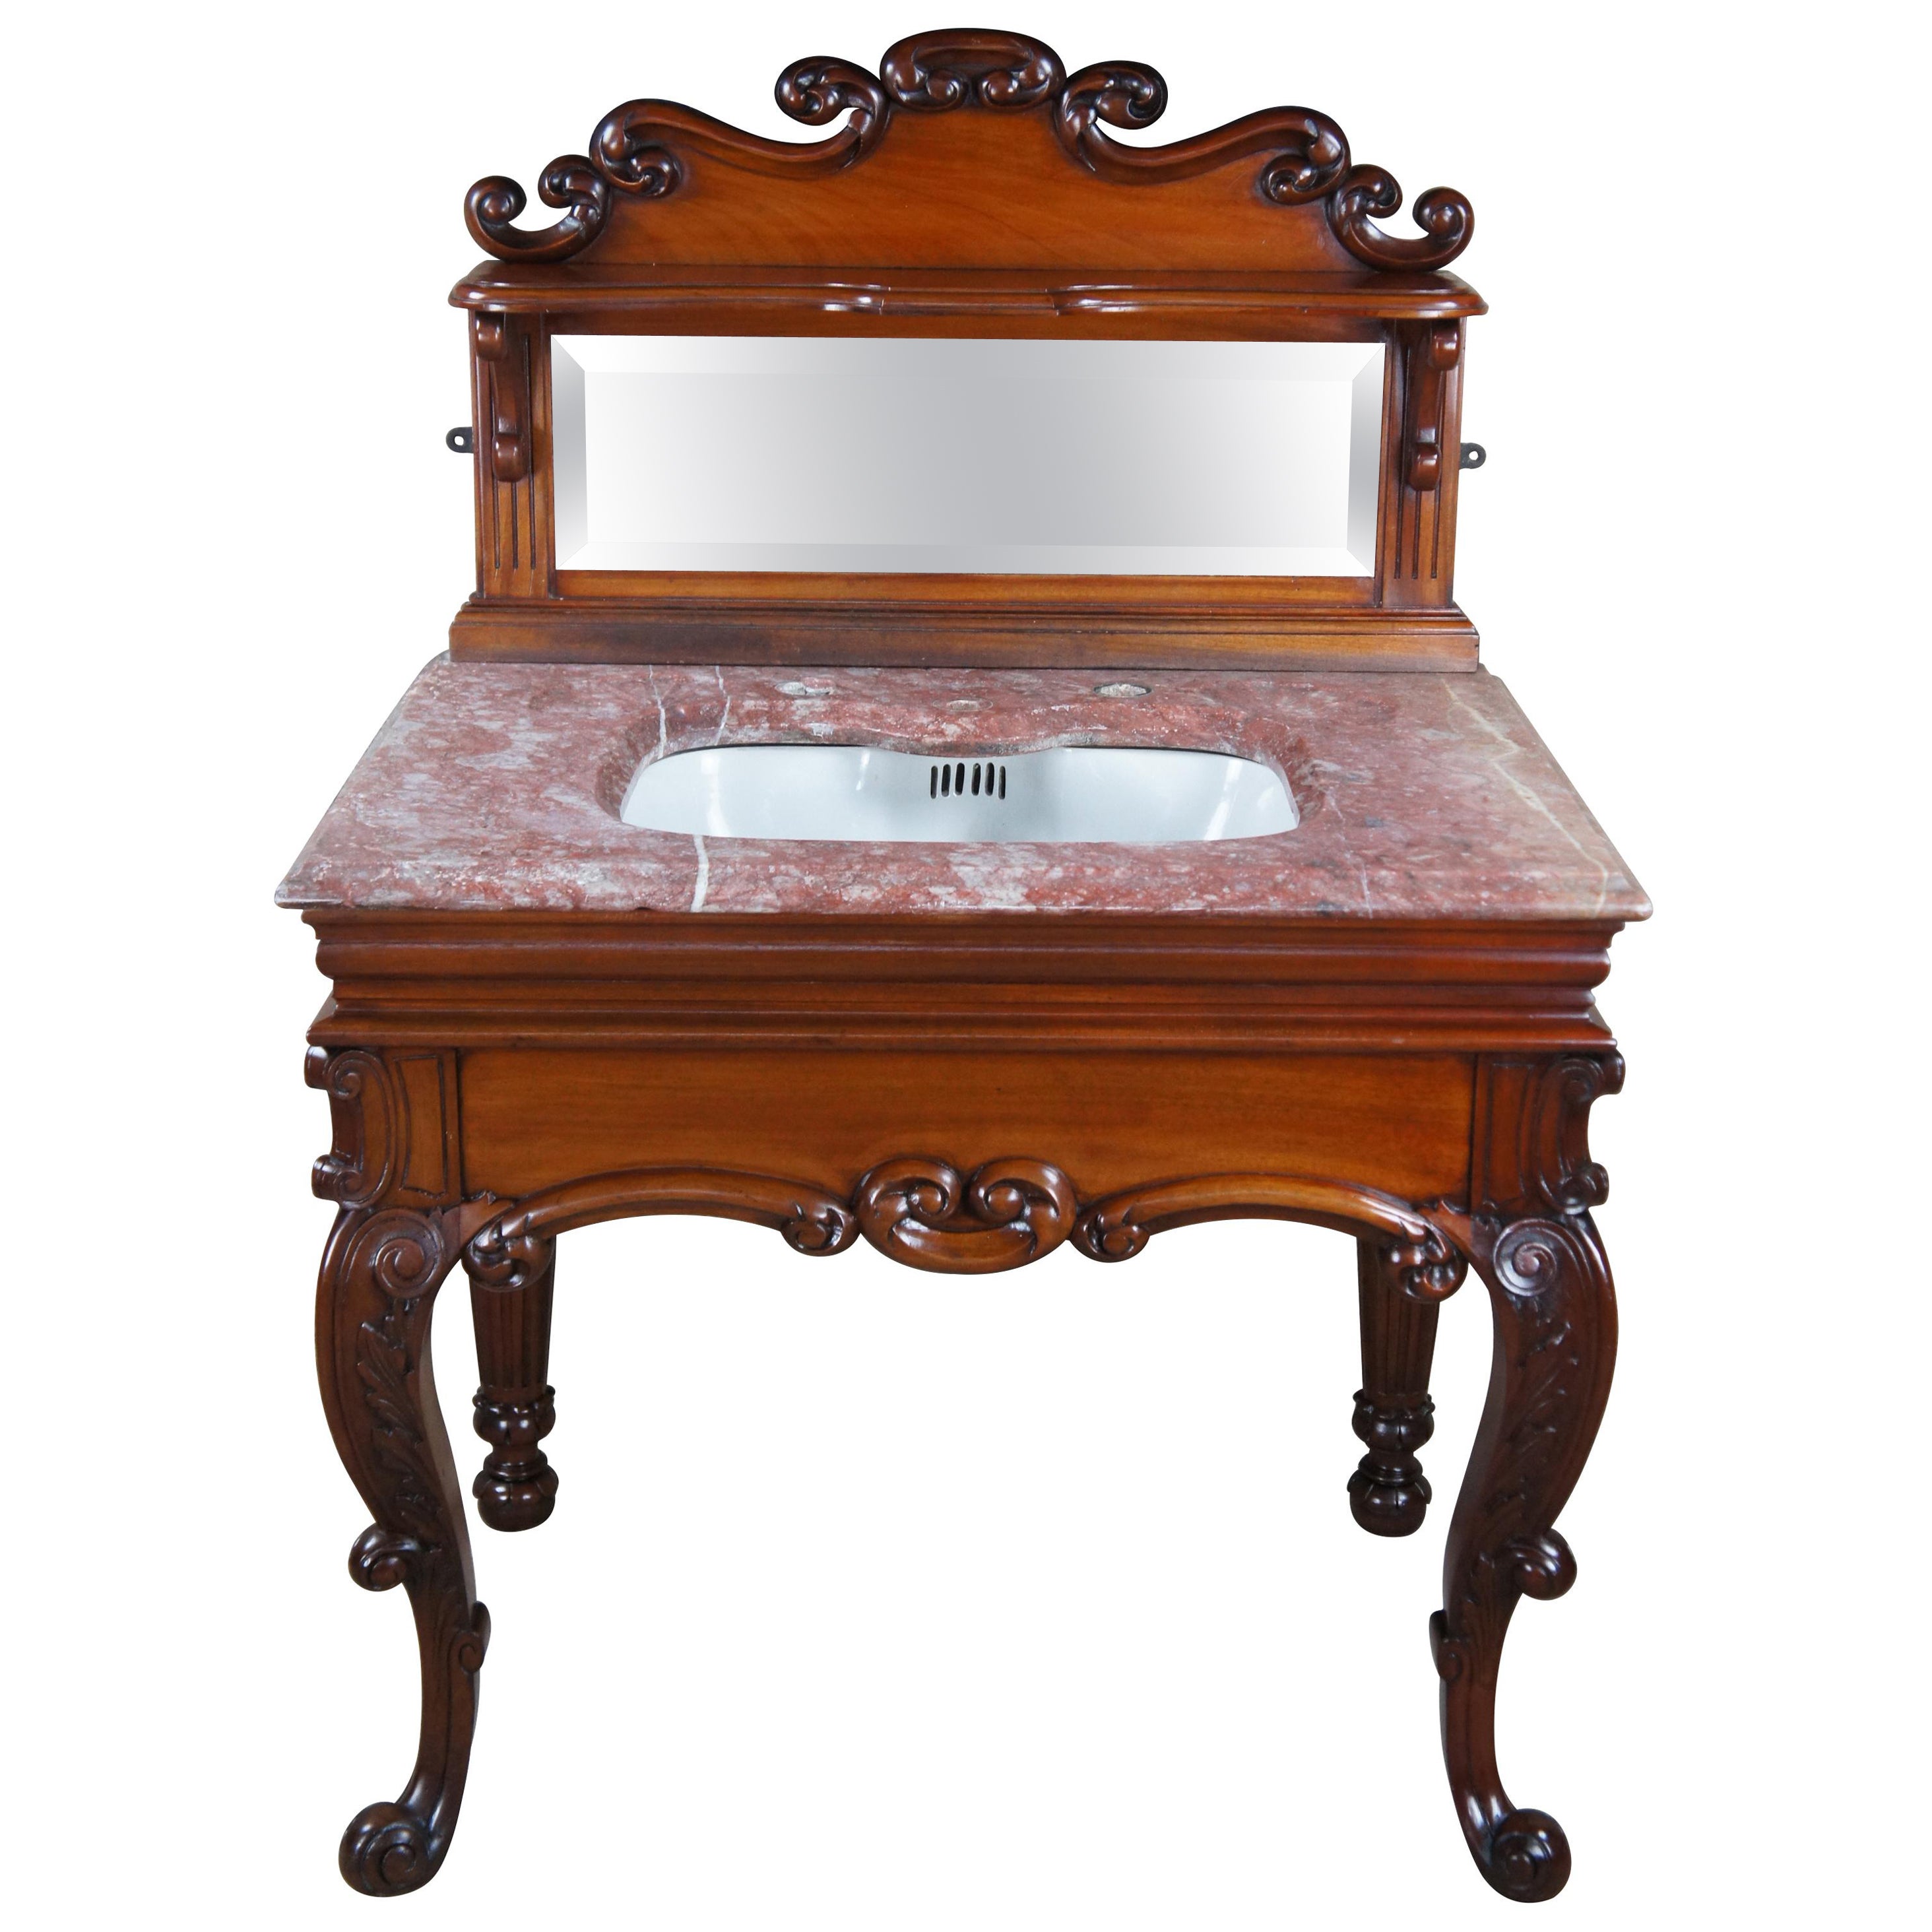 Rare Antique French Victorian Mahogany Marble Top Bathroom Vanity Porcelain Sink For Sale